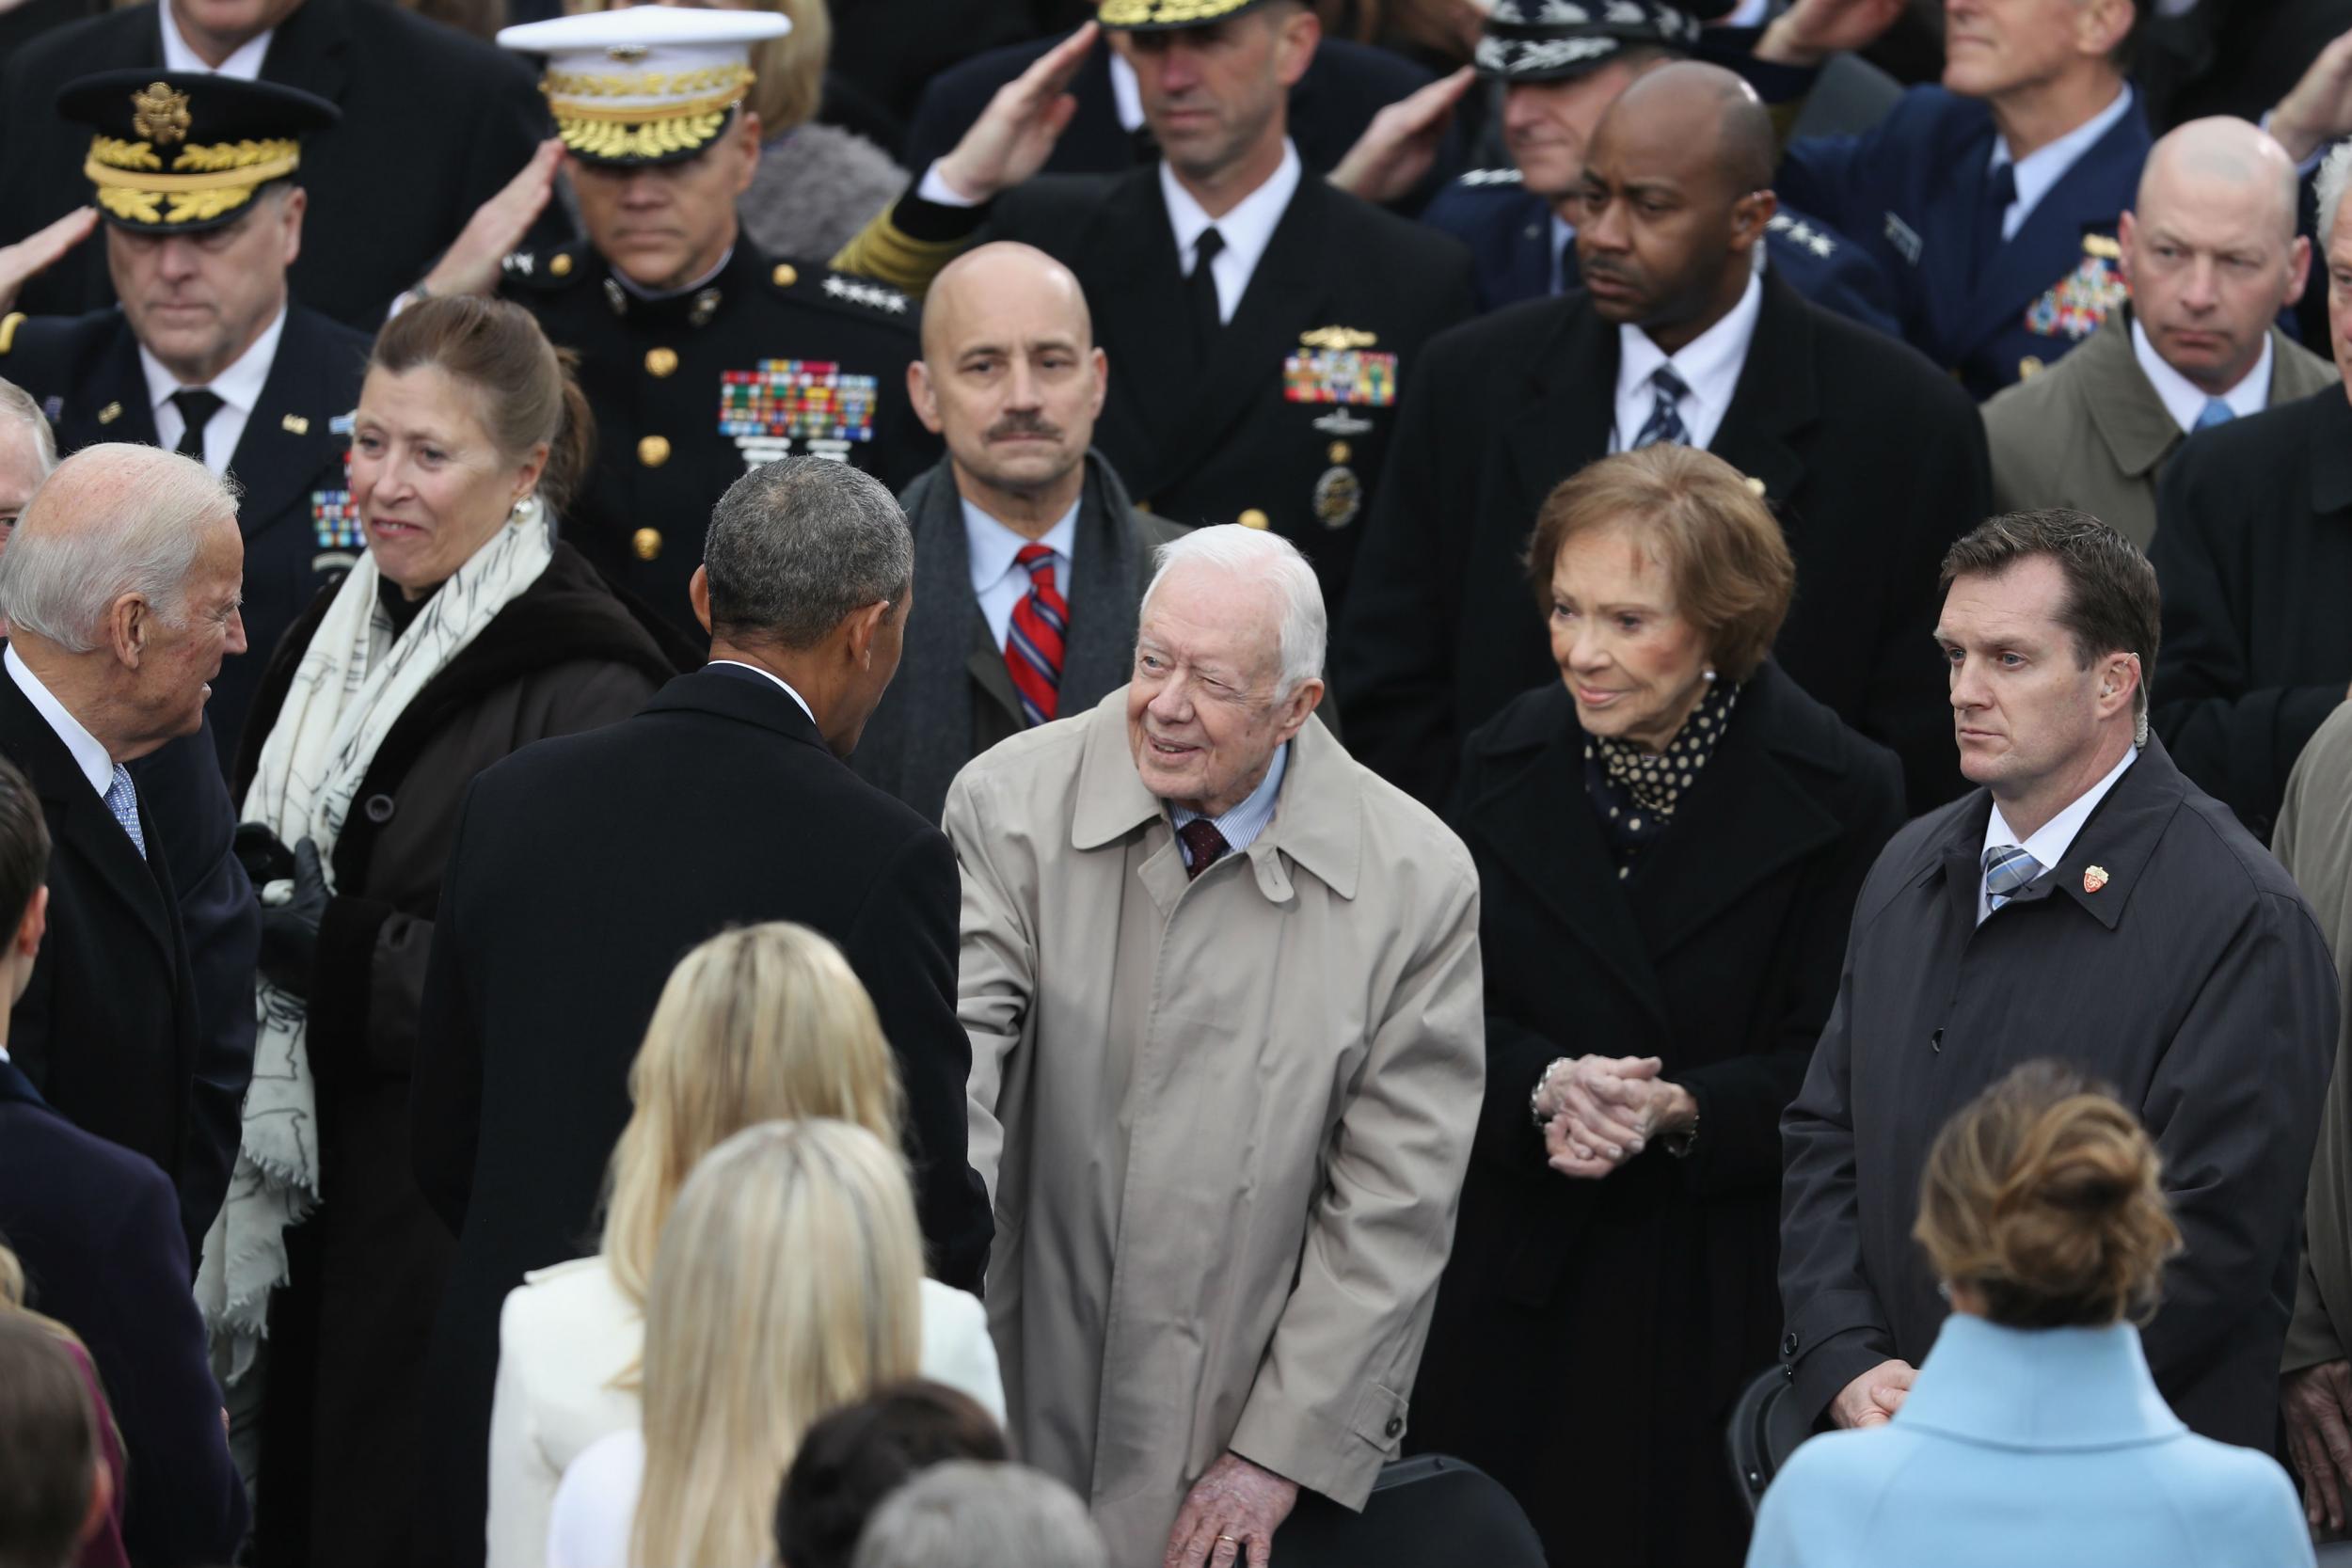 Former President Jimmy Carter being greeted by Barack Obama at the Trump inauguration this January